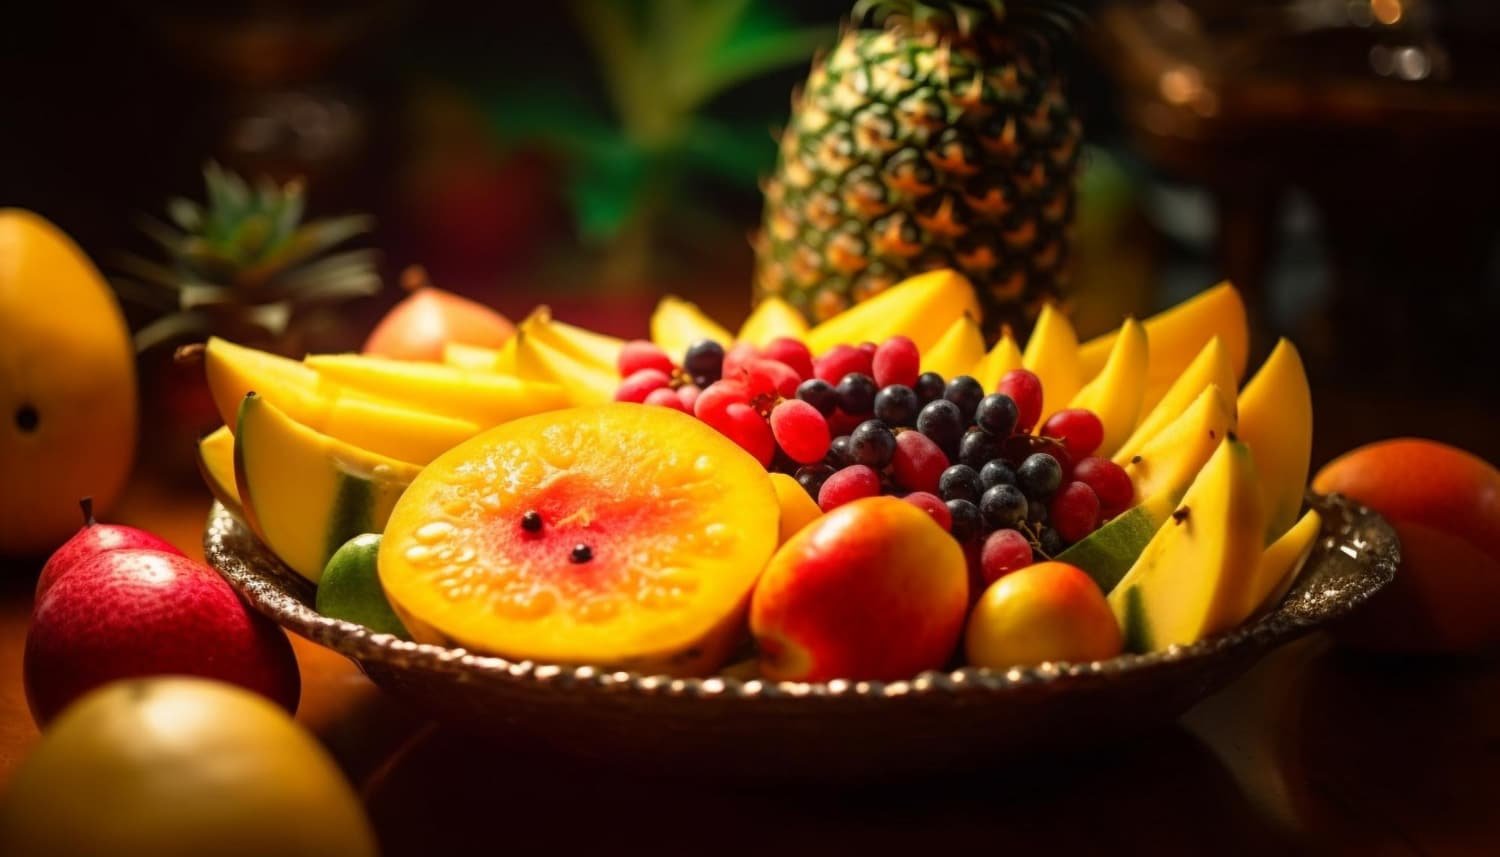 Taste The Exotic With Tropical Fruit Box’s Fresh Tropical Fruits Delivered